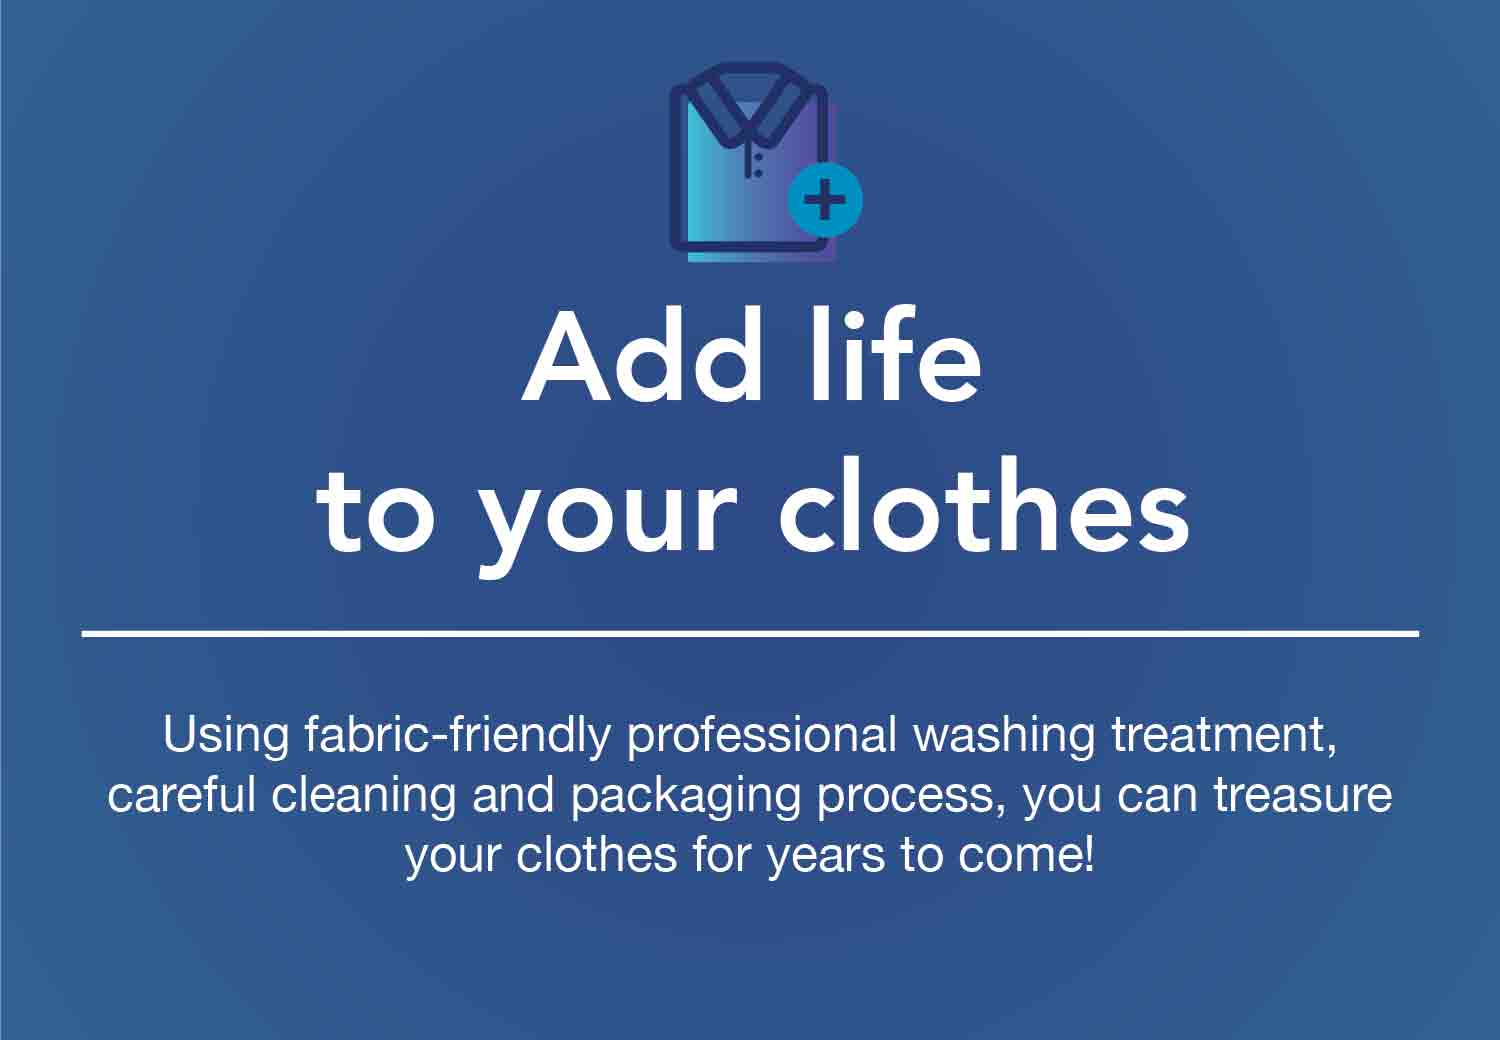 Add life to your clothes. Puro Fabricare have ways of laundering that have been tested to prolong your garment lifespan. All of our processes, from drycleaning to stain removal, are aimed to keep your clothes' fiber and color stays strong.